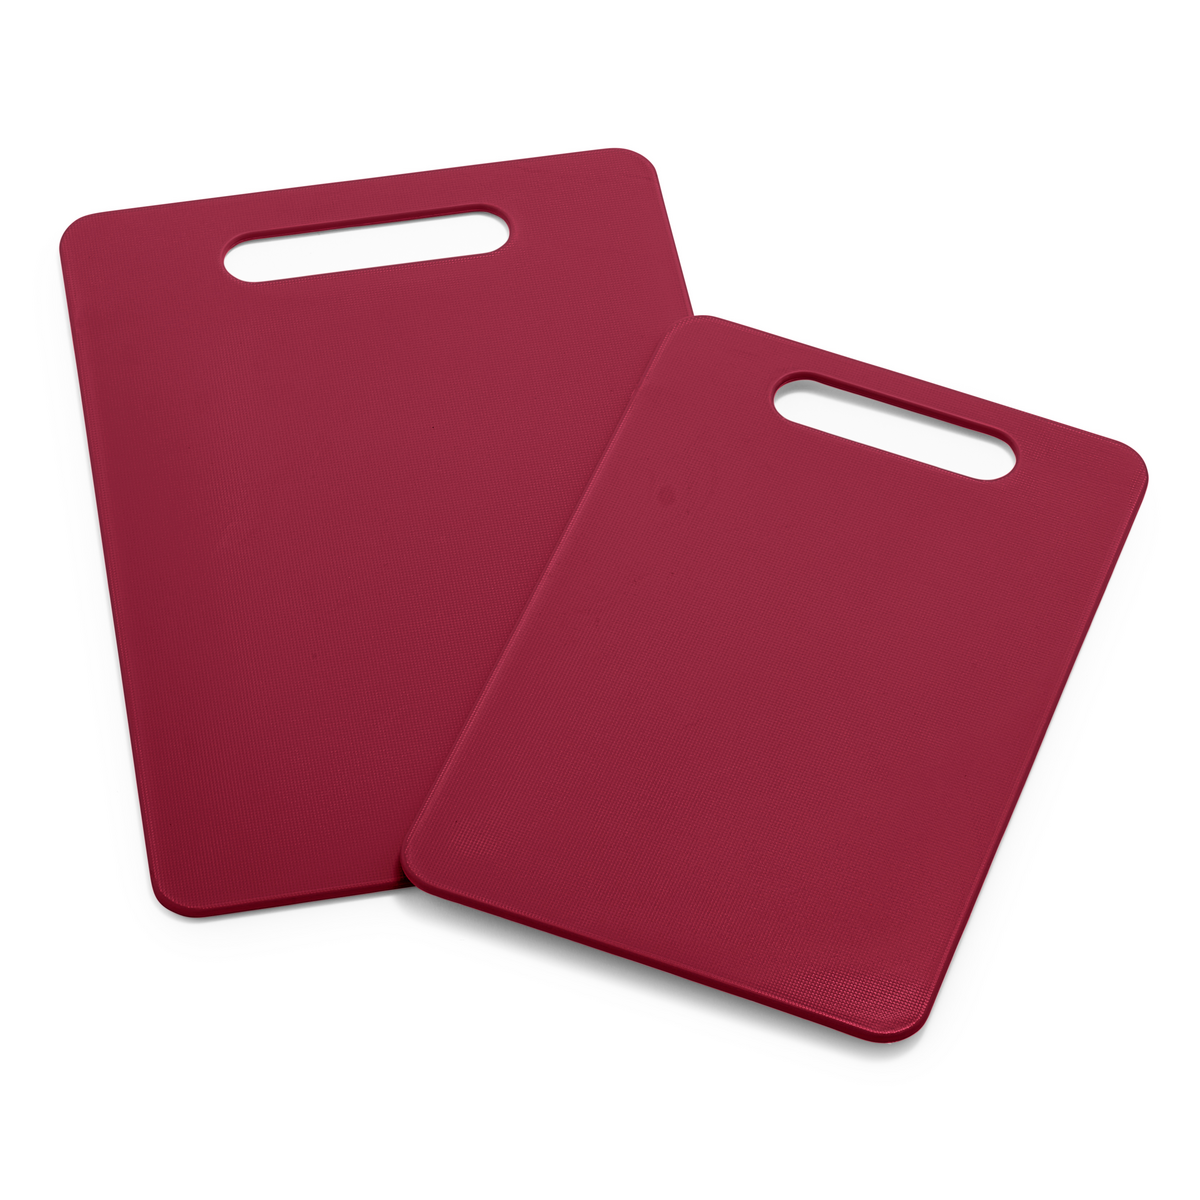 Preserve BPA-Free Cutting Board Set - Large (3 Pieces - 1 White, 1 Green  and 1 Red)